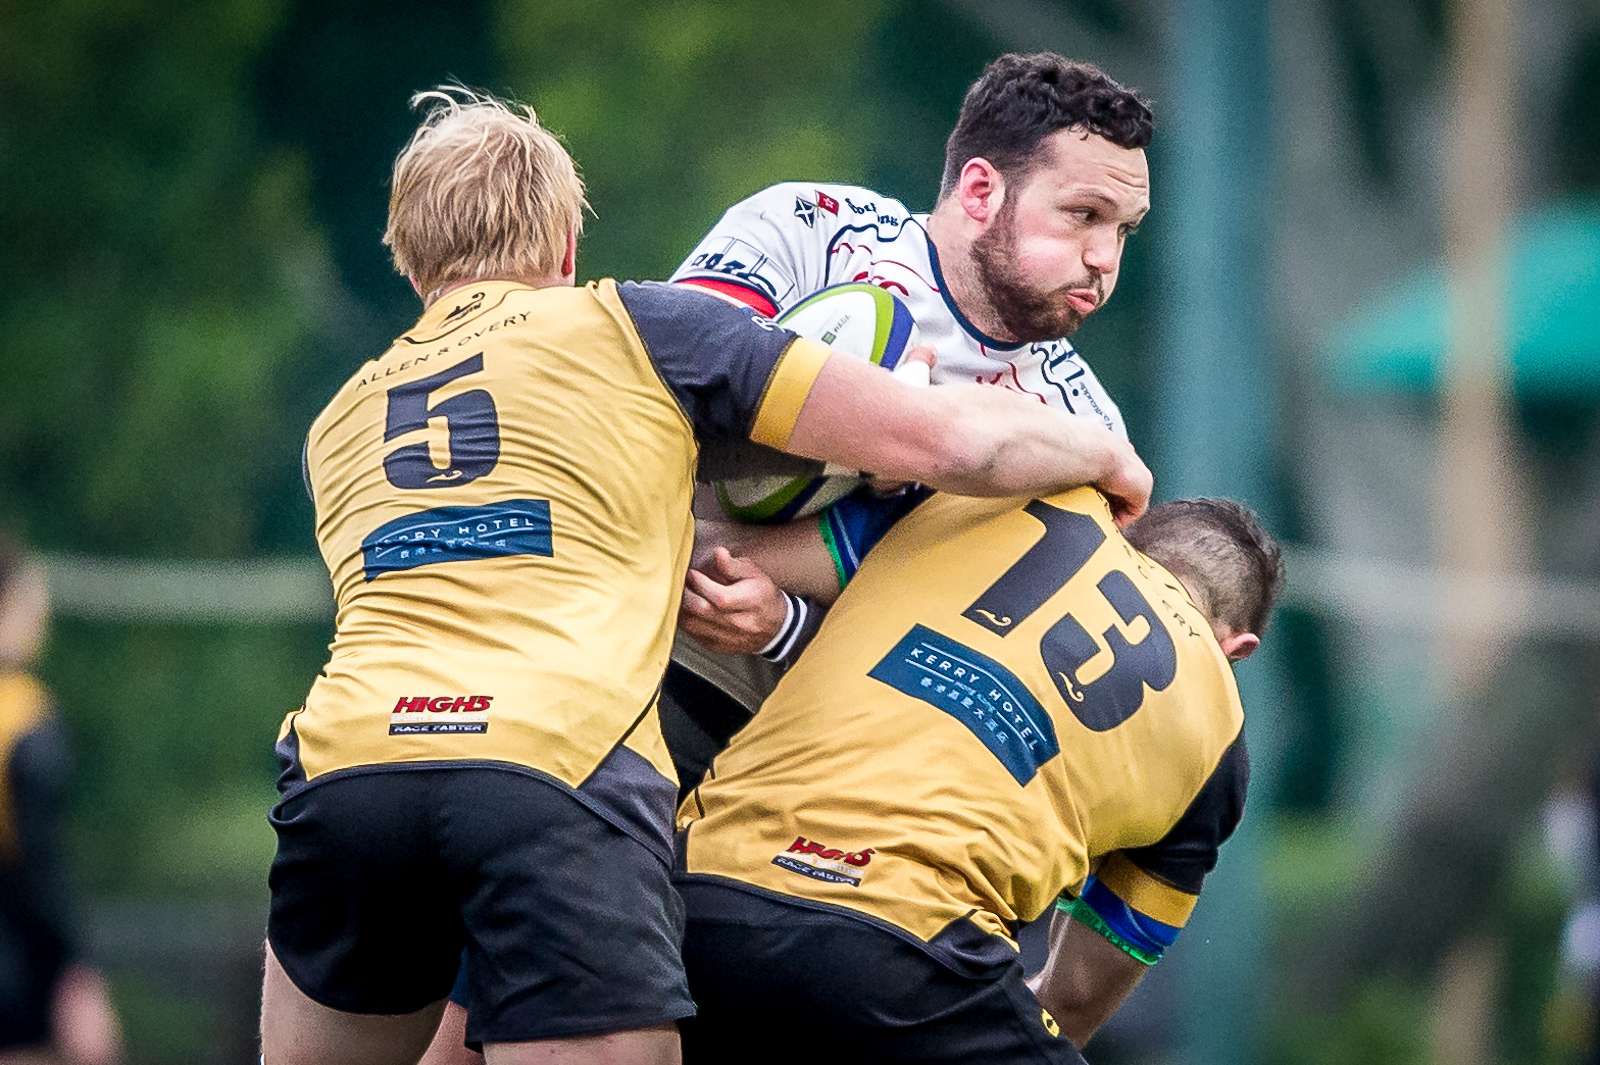 HK Scottish centre Conor Hartley feels the heat in his side’s quarter-final loss to the Borrelli Walsh USRC Tigers. Photo: HKRU